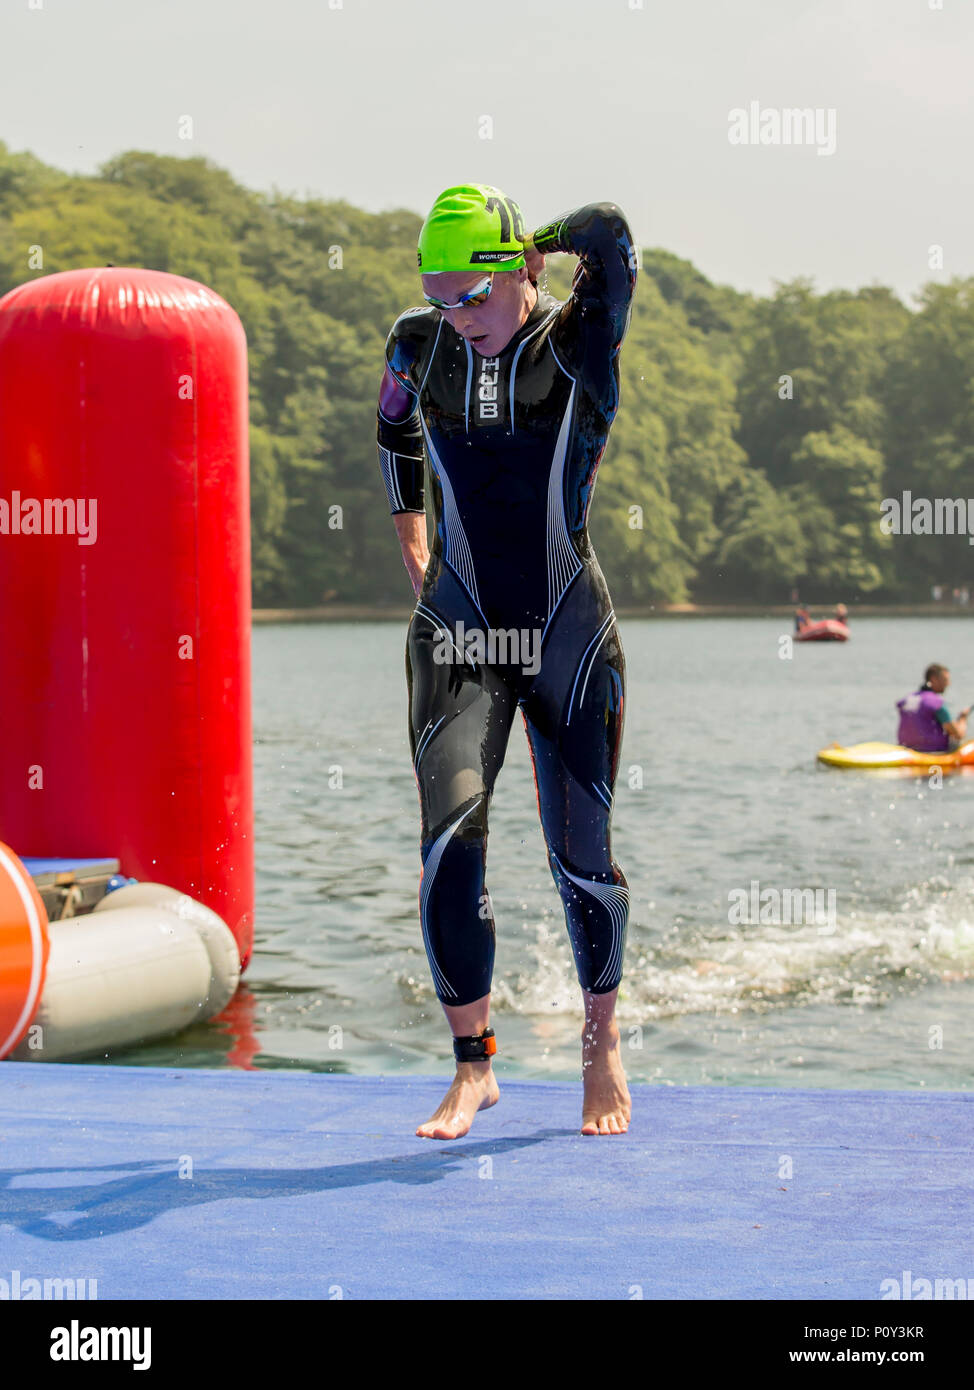 Leeds, UK. 10th June, 2018. AJ Bell World Triathlon Series, Leeds; Jessica Learmonth (GBR) exits the swim on her way to Transition 1 during the Elite Womens race of the AJ Bell World Triathlon Leeds Credit: Action Plus Sports/Alamy Live News Stock Photo